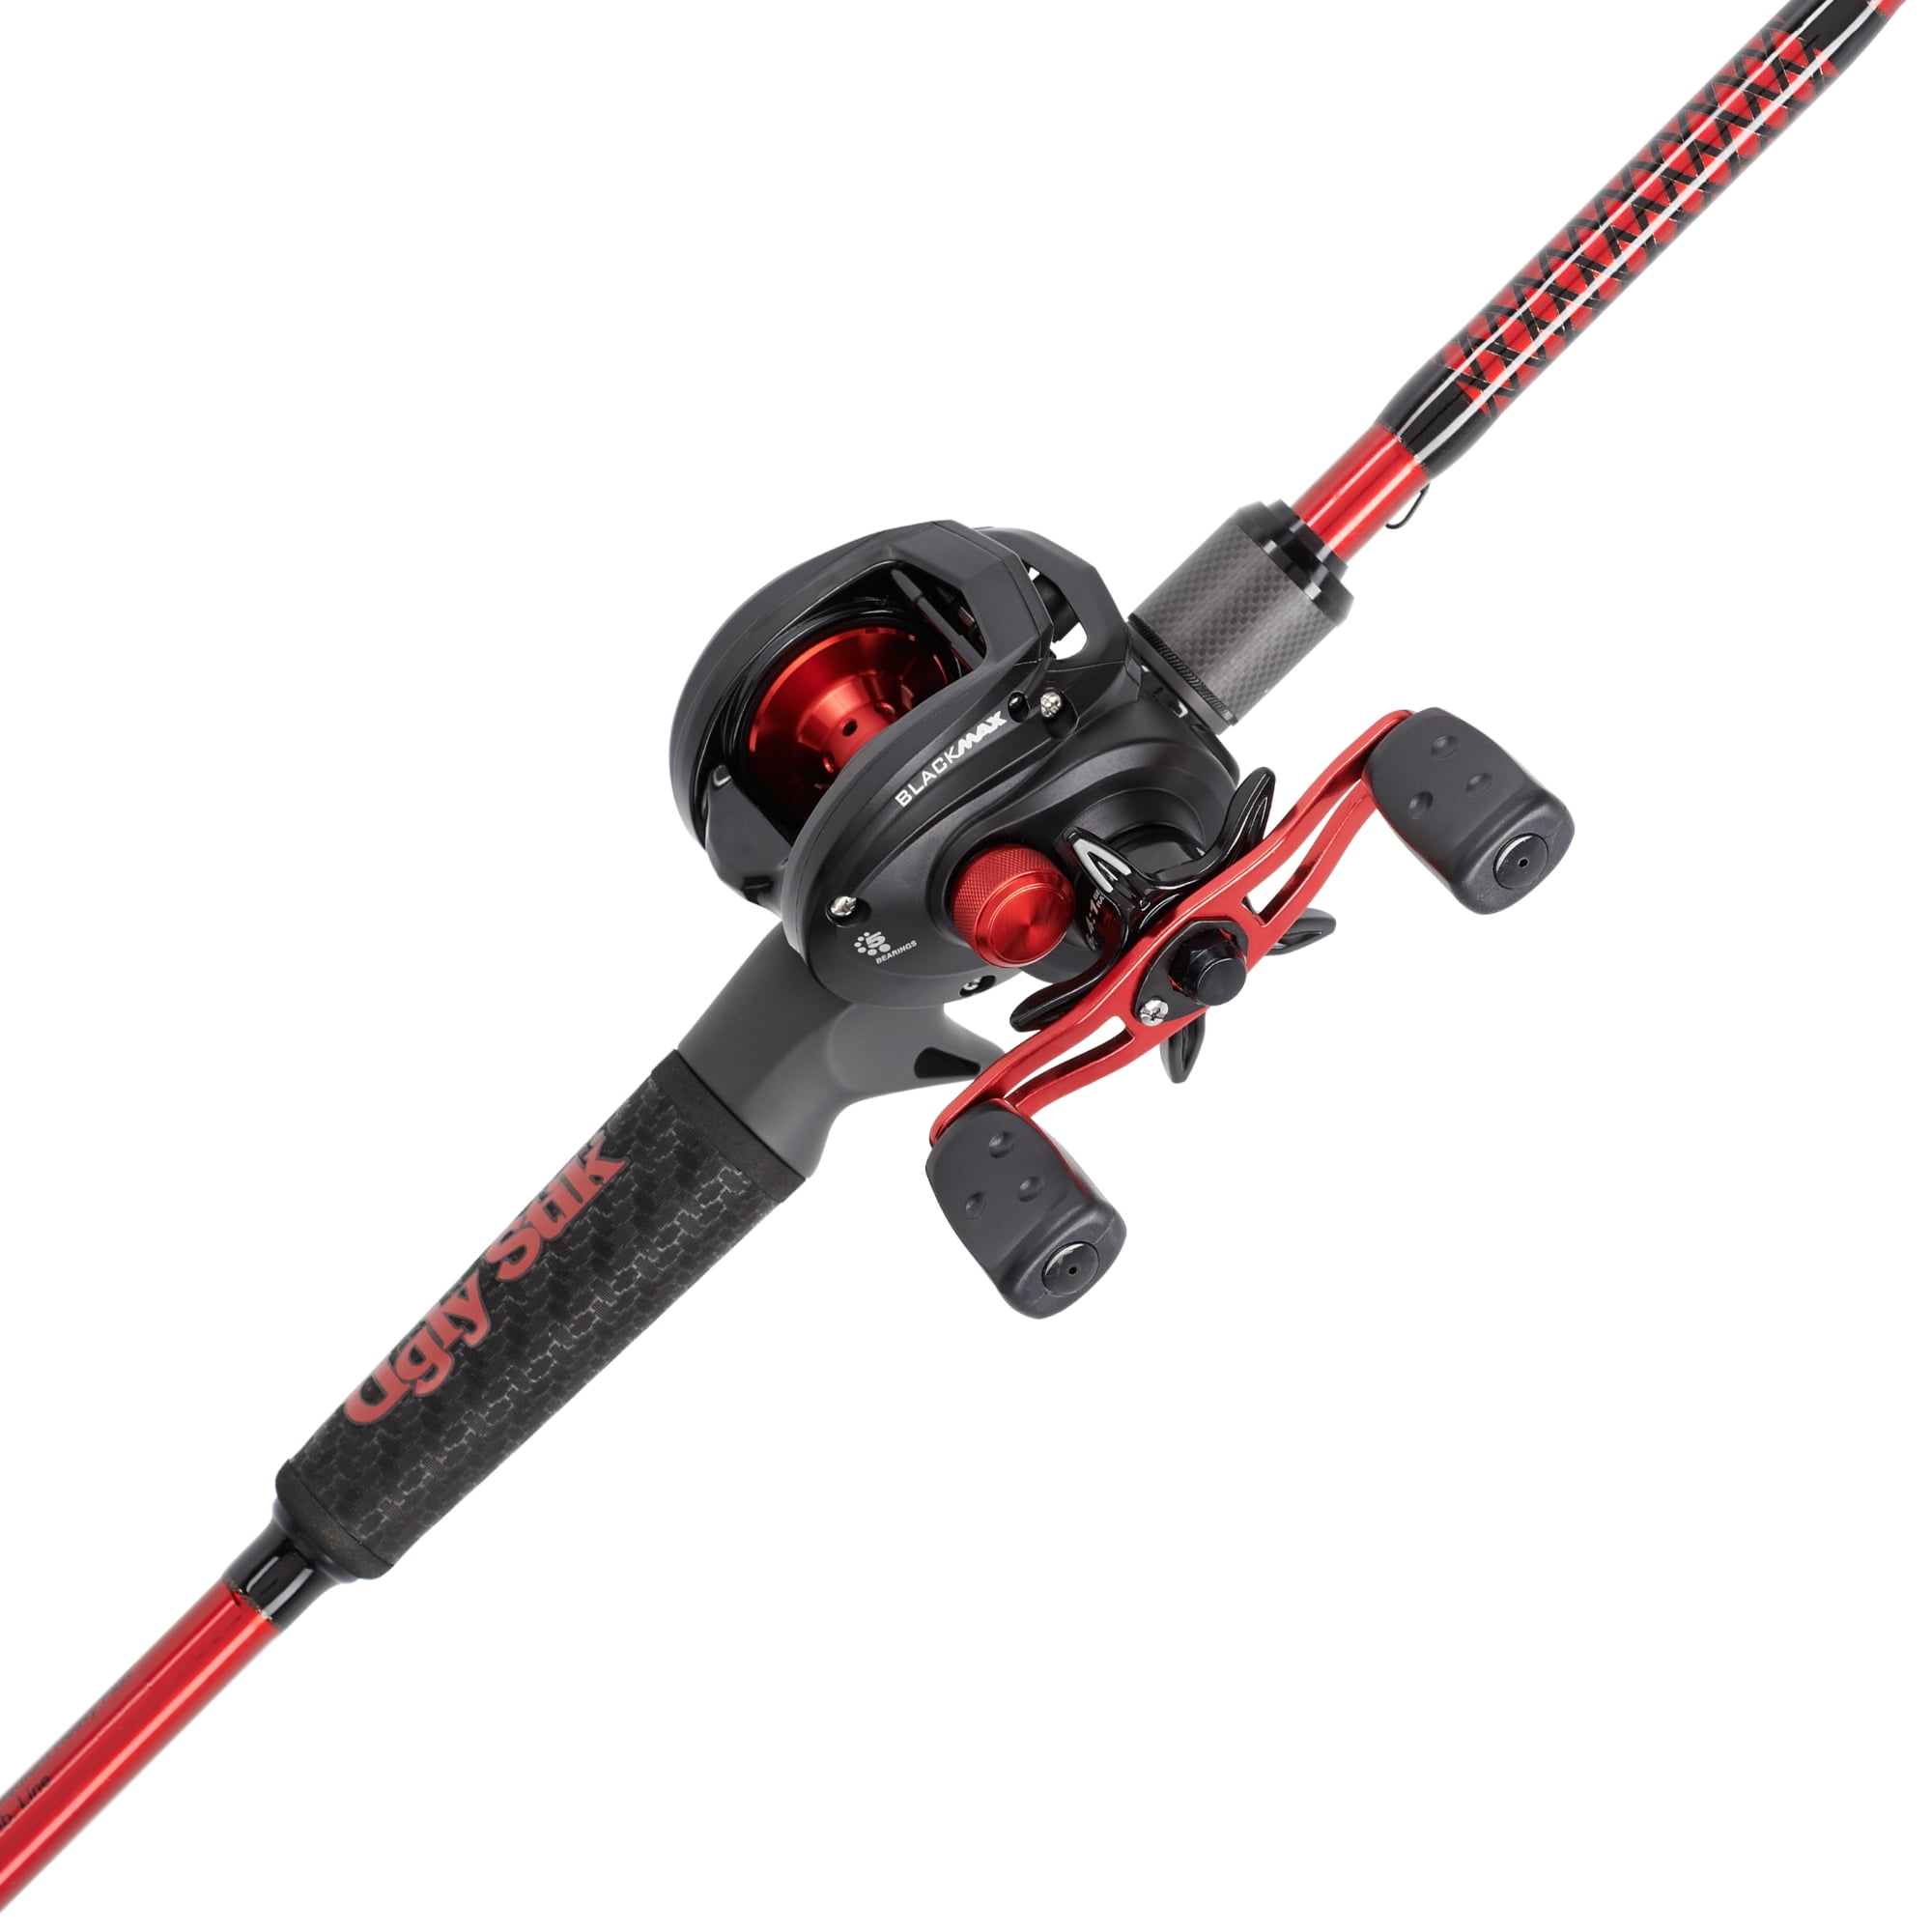 Ugly Stik 7’ Carbon Baitcast Fishing Rod and Reel Casting Combo